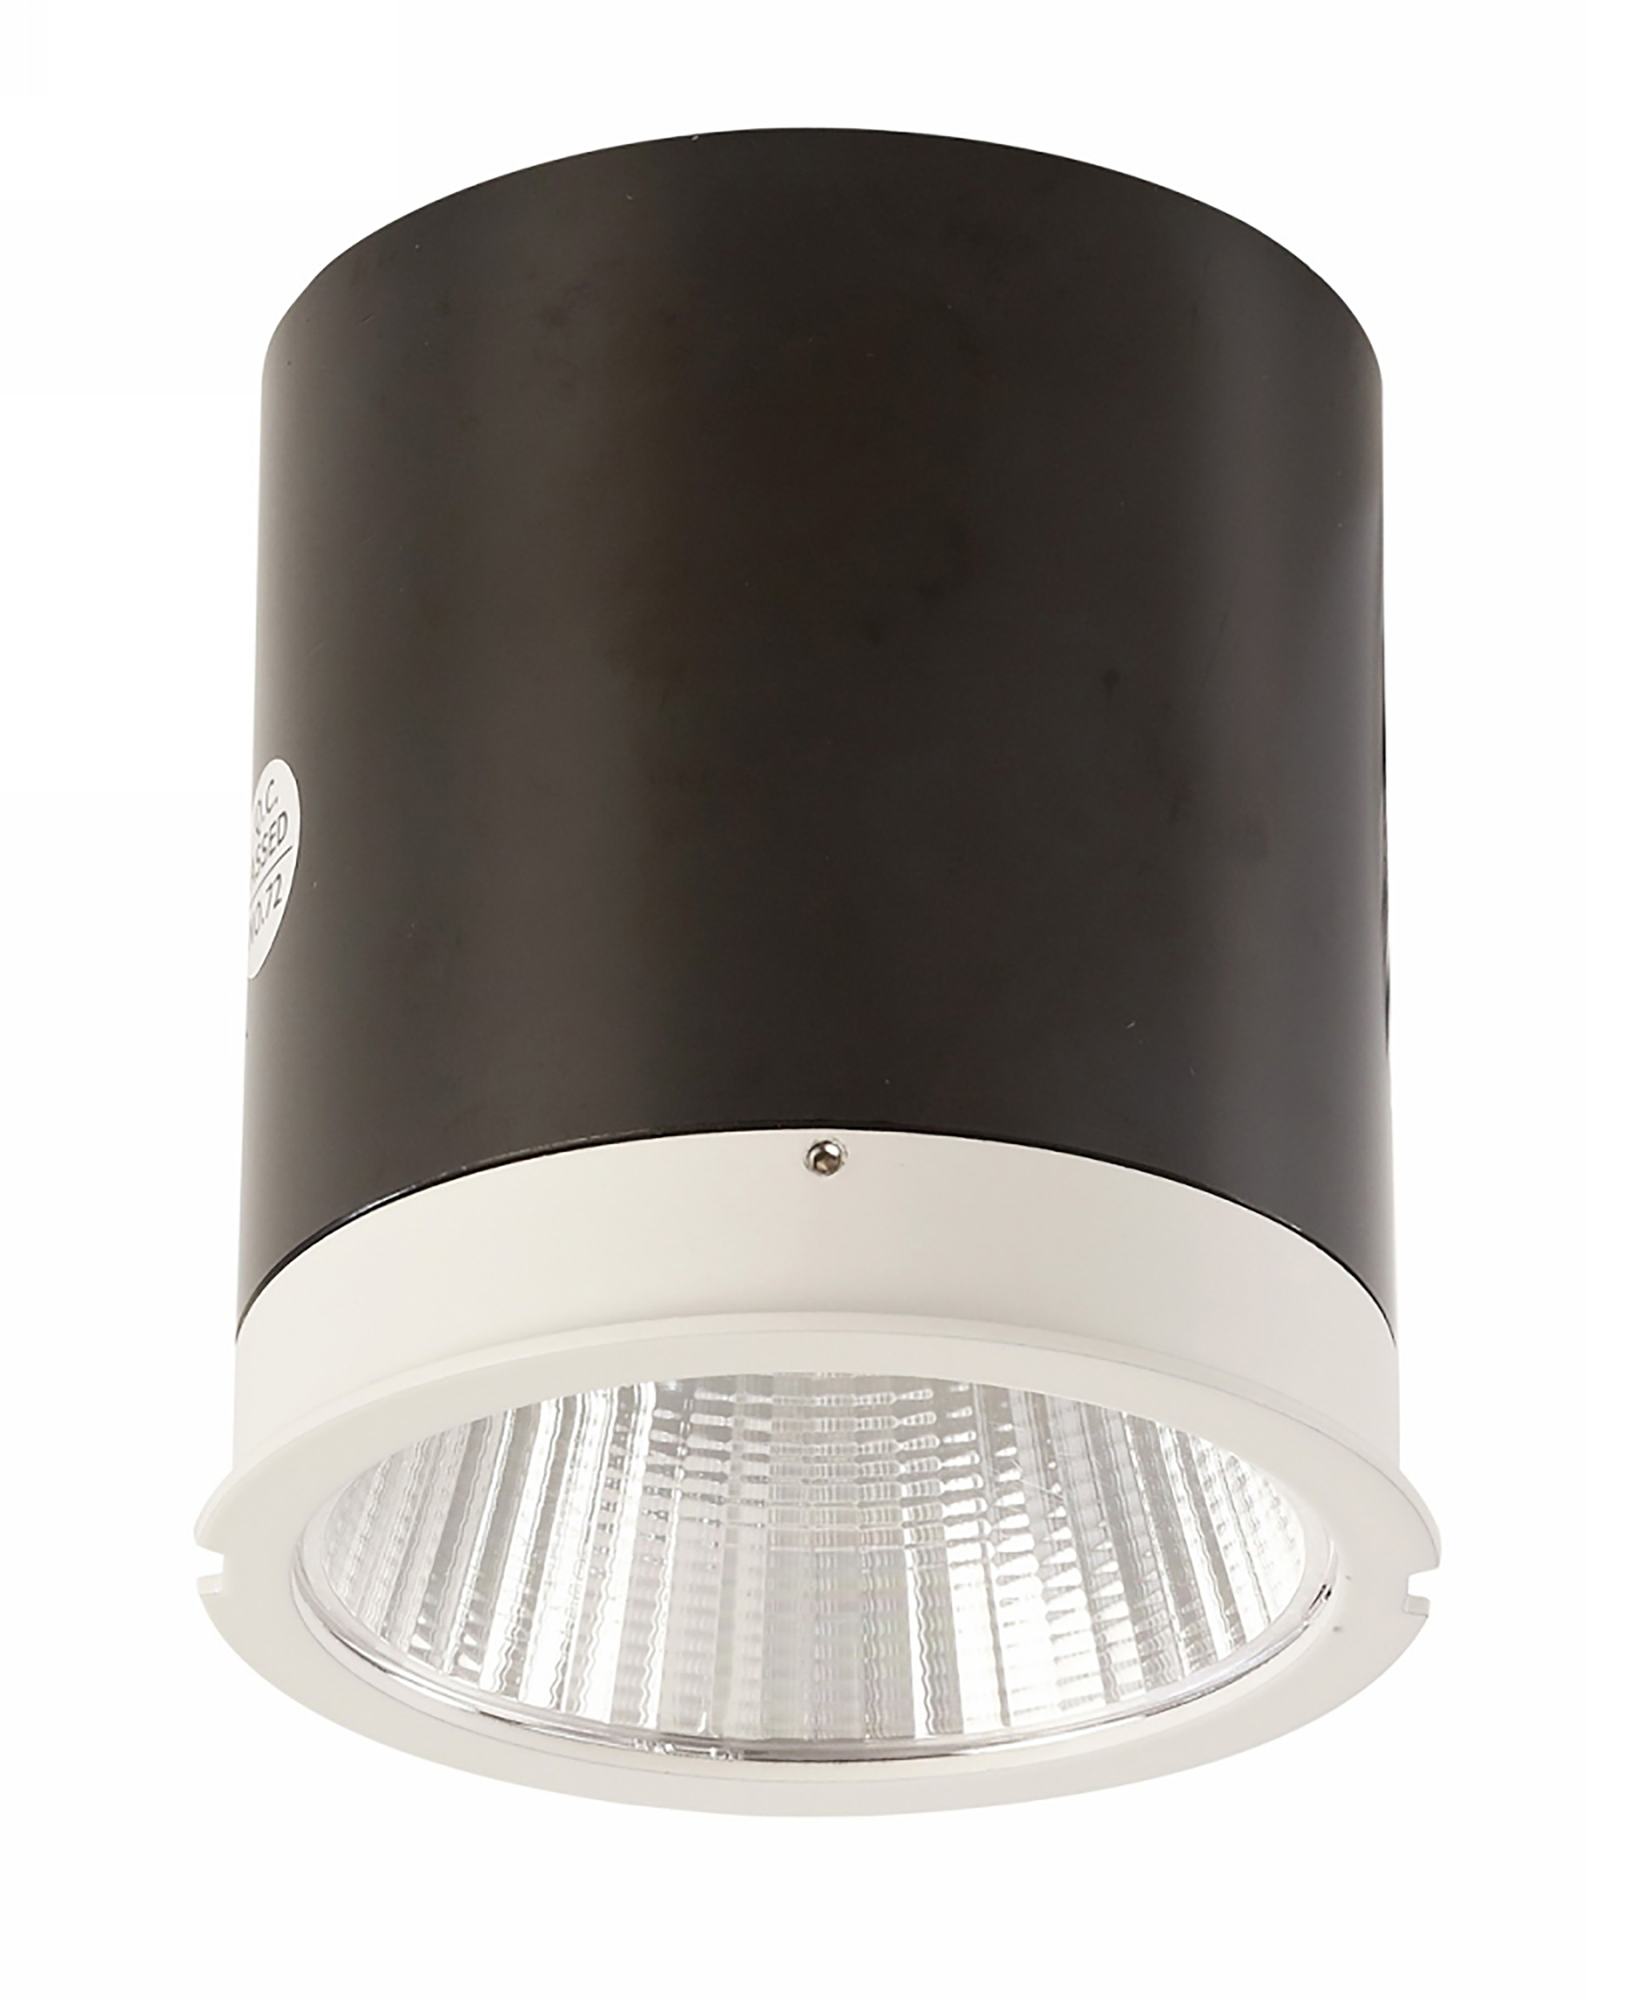 Bardian 30 Recessed Ceiling Luminaires Dlux Round Recess Ceiling